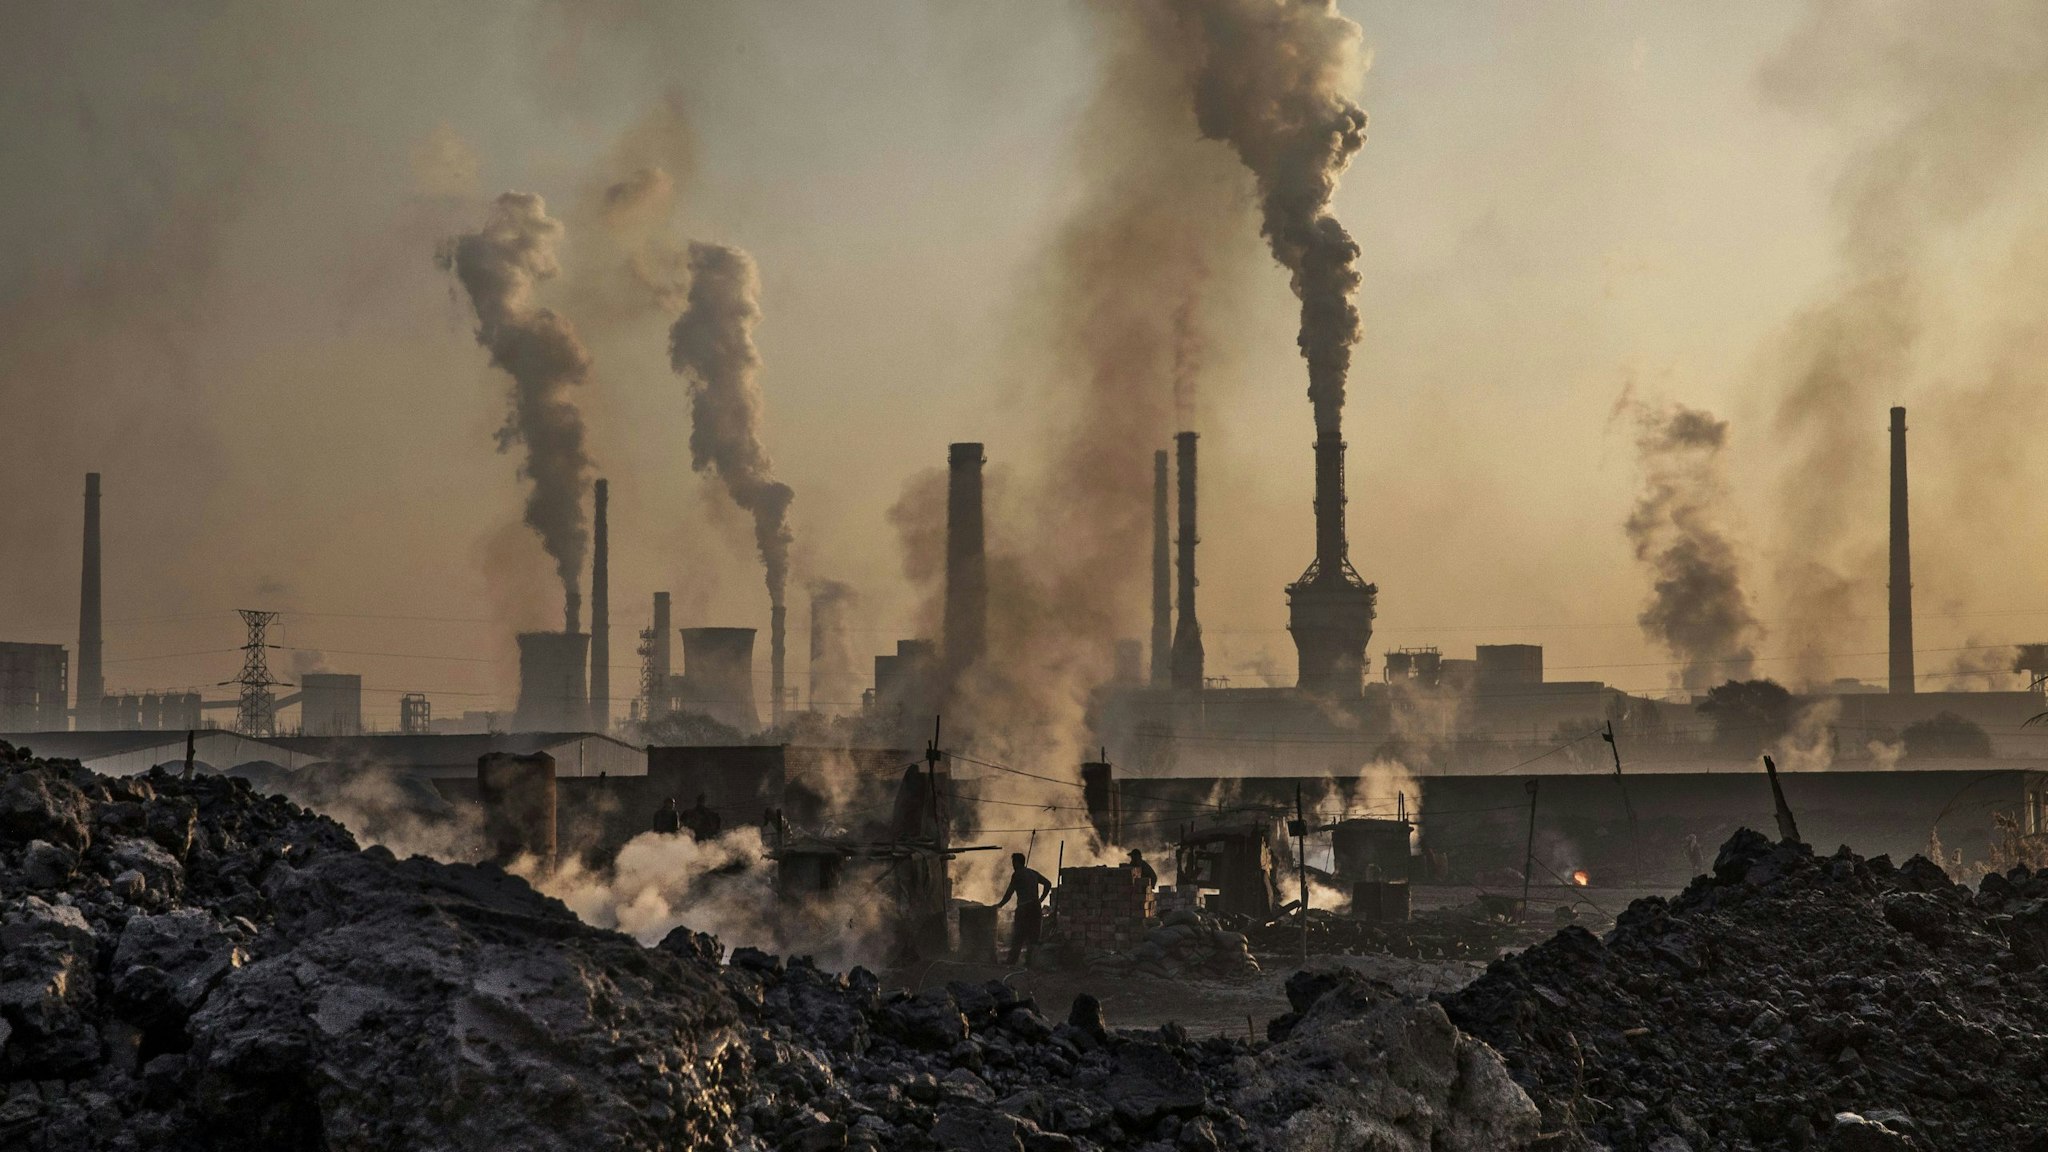 INNER MONGOLIA, CHINA - NOVEMBER 04: Smoke billows from a large steel plant as a Chinese labourer works at an unauthorized steel factory, foreground, on November 4, 2016 in Inner Mongolia, China. To meet China's targets to slash emissions of carbon dioxide, authorities are pushing to shut down privately owned steel, coal, and other high-polluting factories scattered across rural areas. In many cases, factory owners say they pay informal 'fines' to local inspectors and then re-open. The enforcement comes as the future of U.S. support for the 2015 Paris Agreement is in question, leaving China poised as an unlikely leader in the international effort against climate change. U.S. president-elect Donald Trump has sent mixed signals about whether he will withdraw the U.S. from commitments to curb greenhouse gases that, according to scientists, are causing the earth's temperature to rise. Trump once declared that the concept of global warming was "created" by China in order to hurt U.S. manufacturing. China's leadership has stated that any change in U.S. climate policy will not affect its commitment to implement the climate action plan. While the world's biggest polluter, China is also a global leader in establishing renewable energy sources such as wind and solar power.